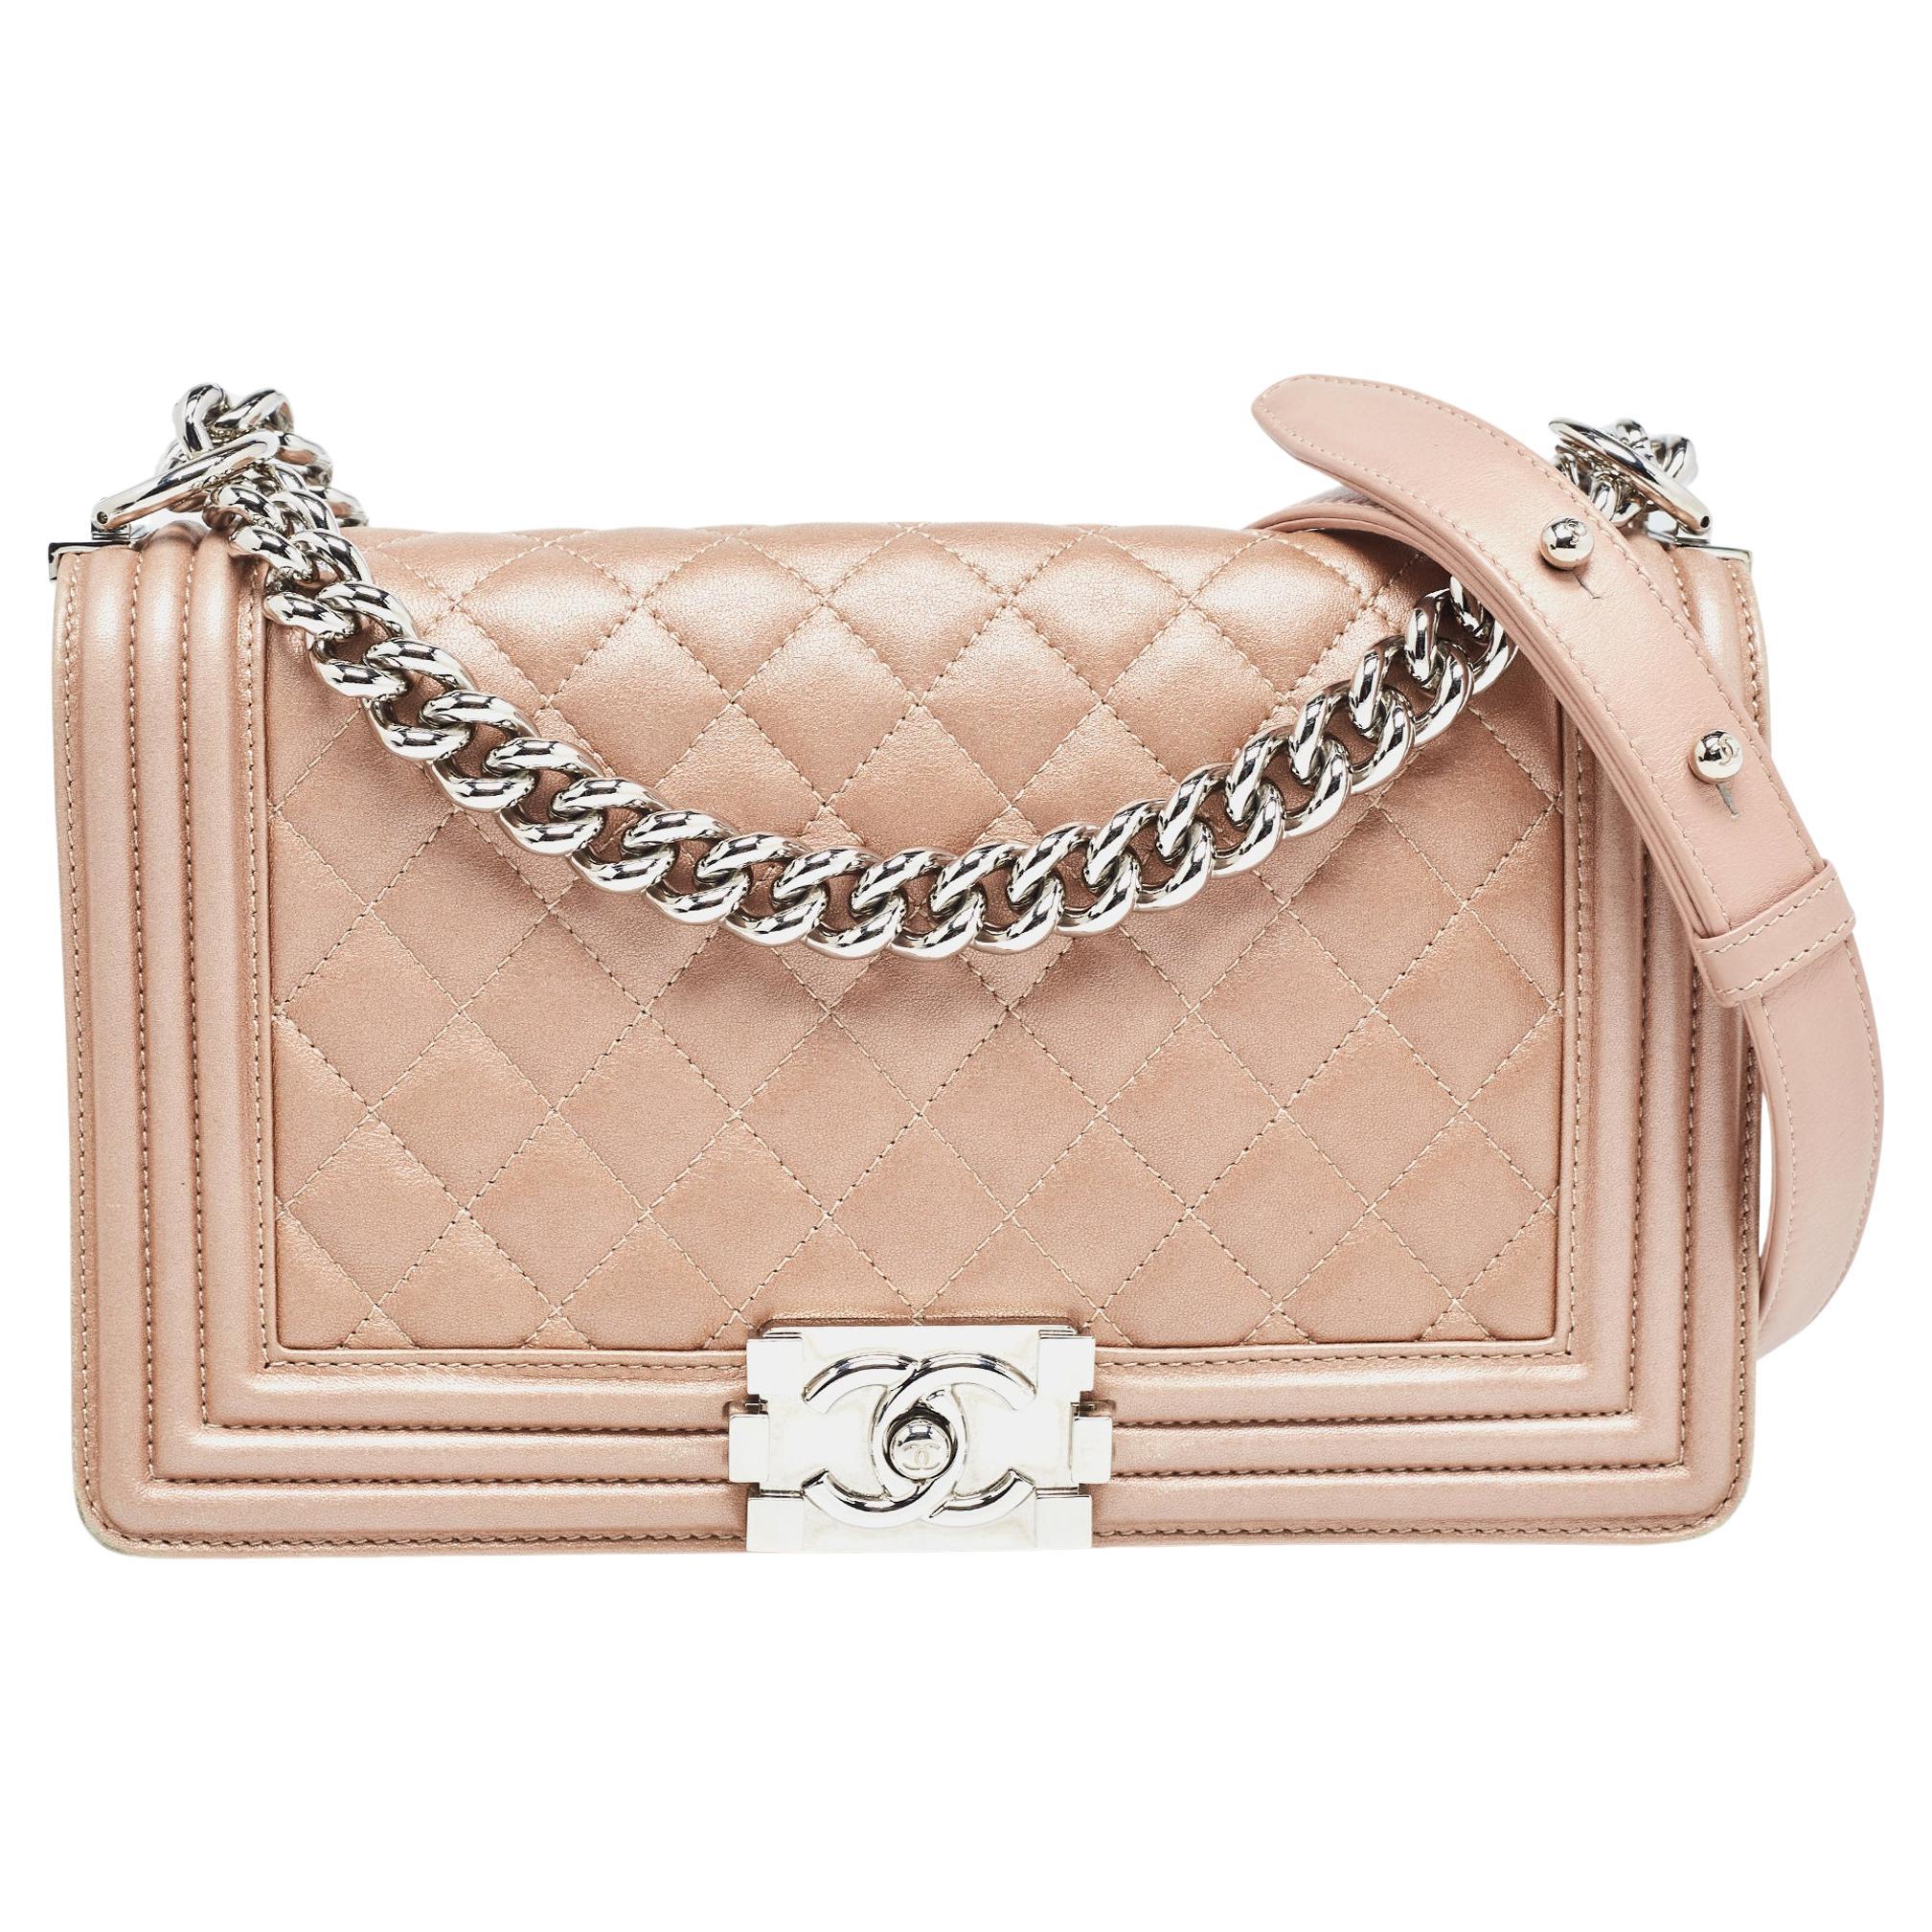 Chanel Metallic Beige Quilted Leather Medium Boy Flap Bag For Sale